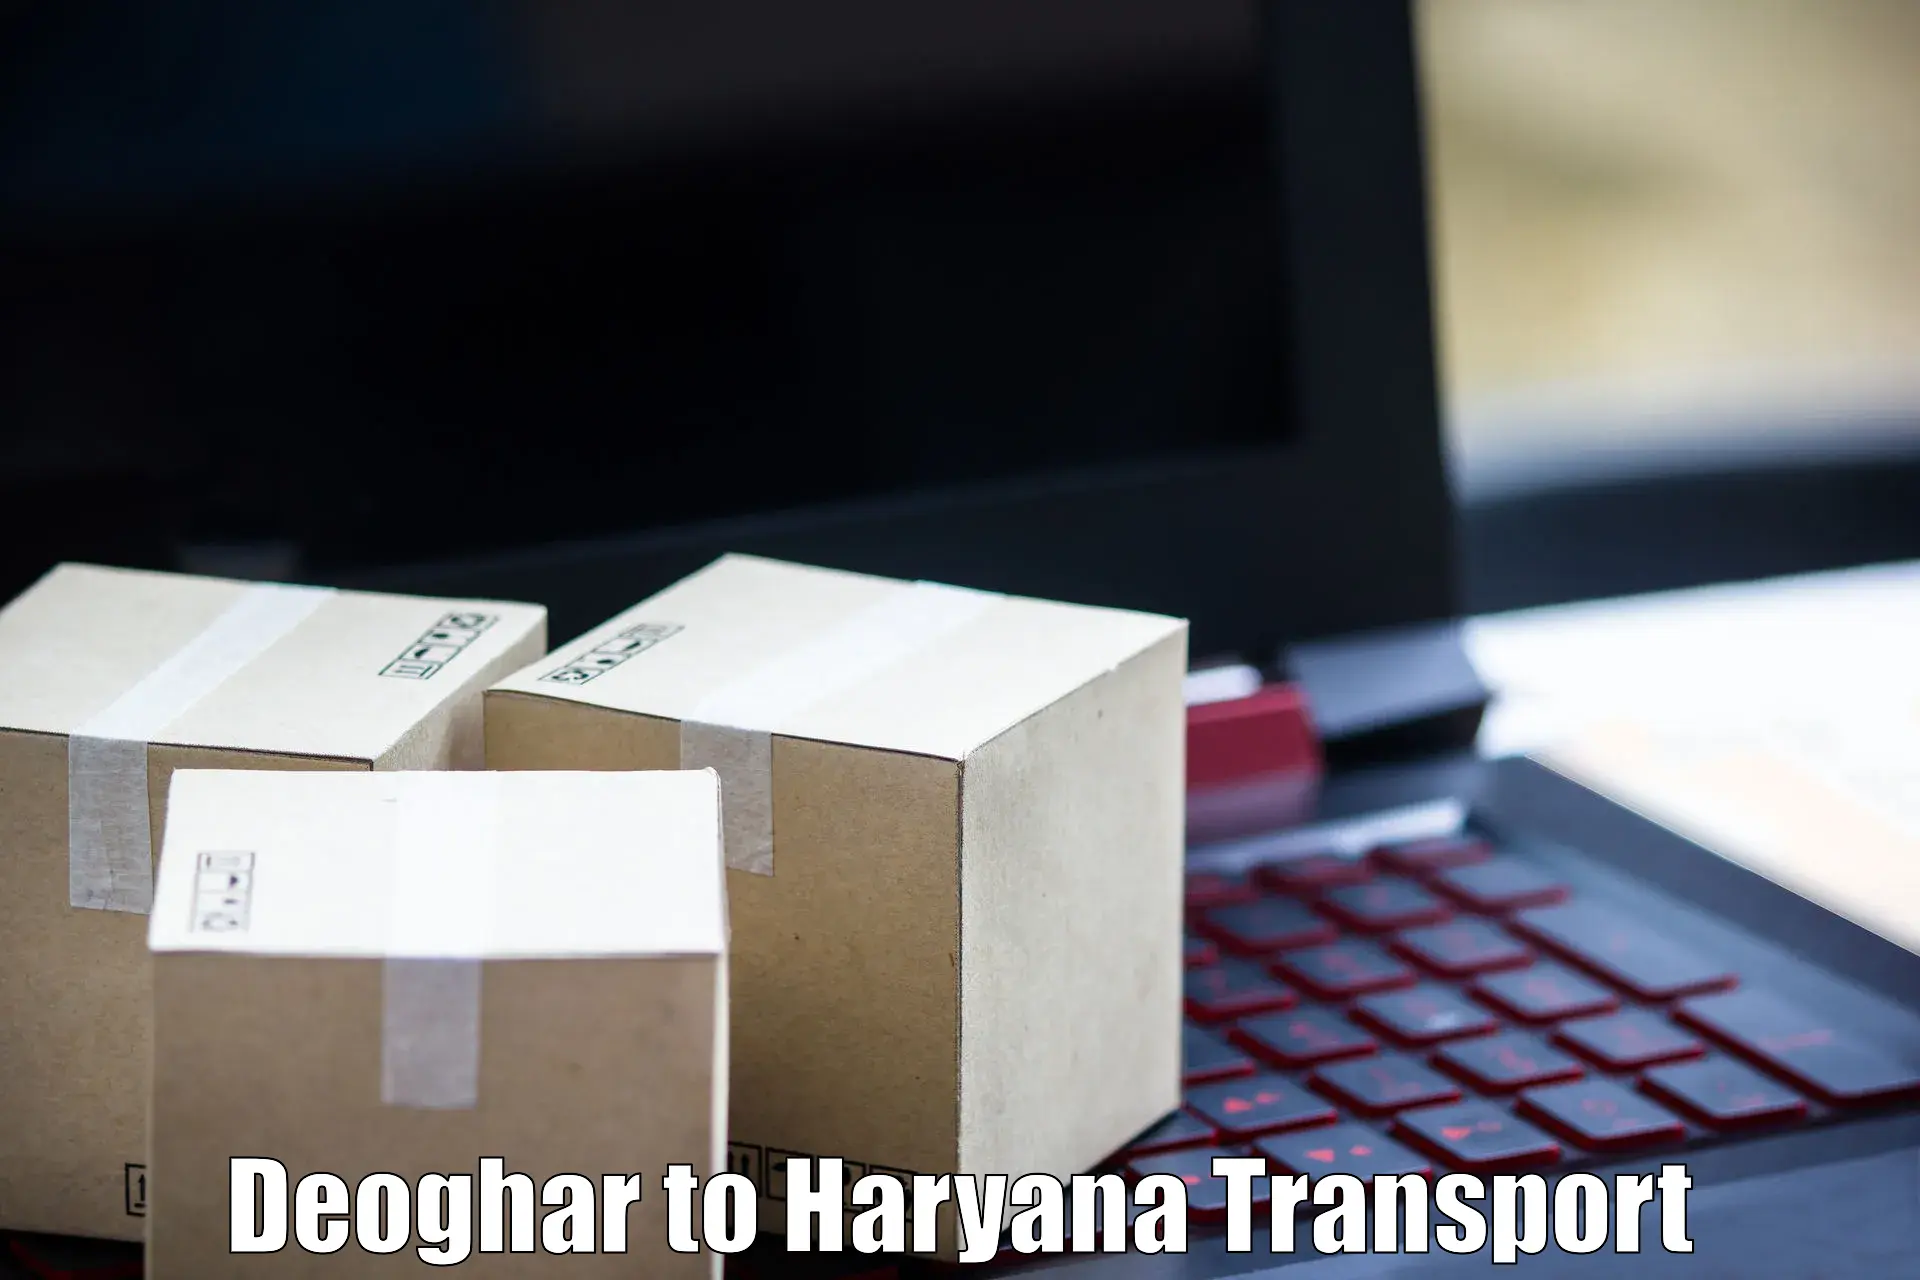 Express transport services Deoghar to Ambala